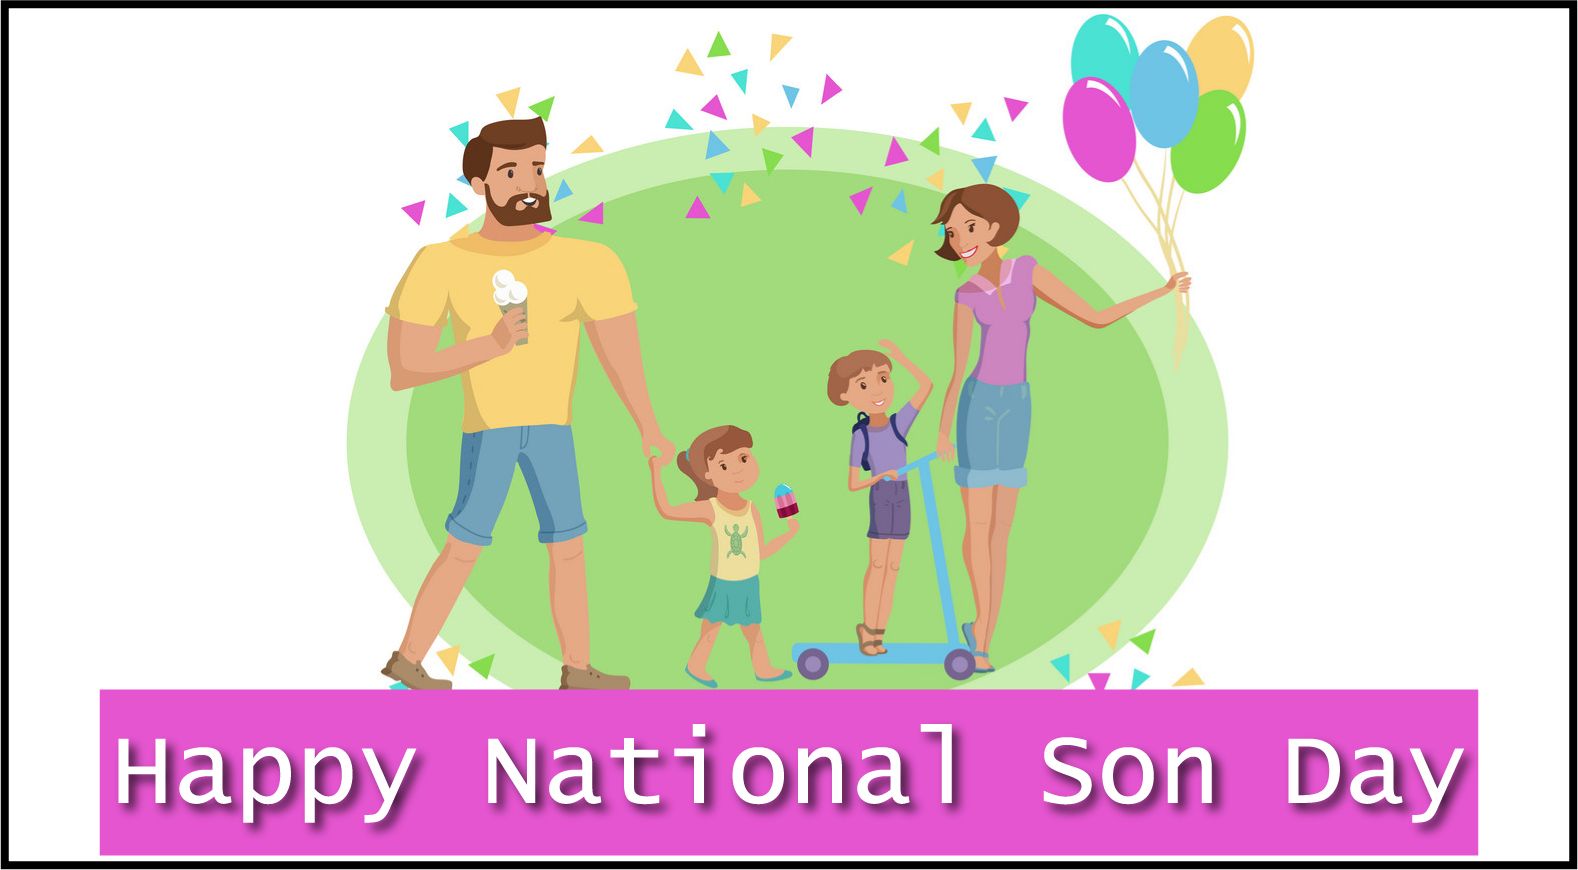 For My Son - 50+ Happy National Sons Day Quotes